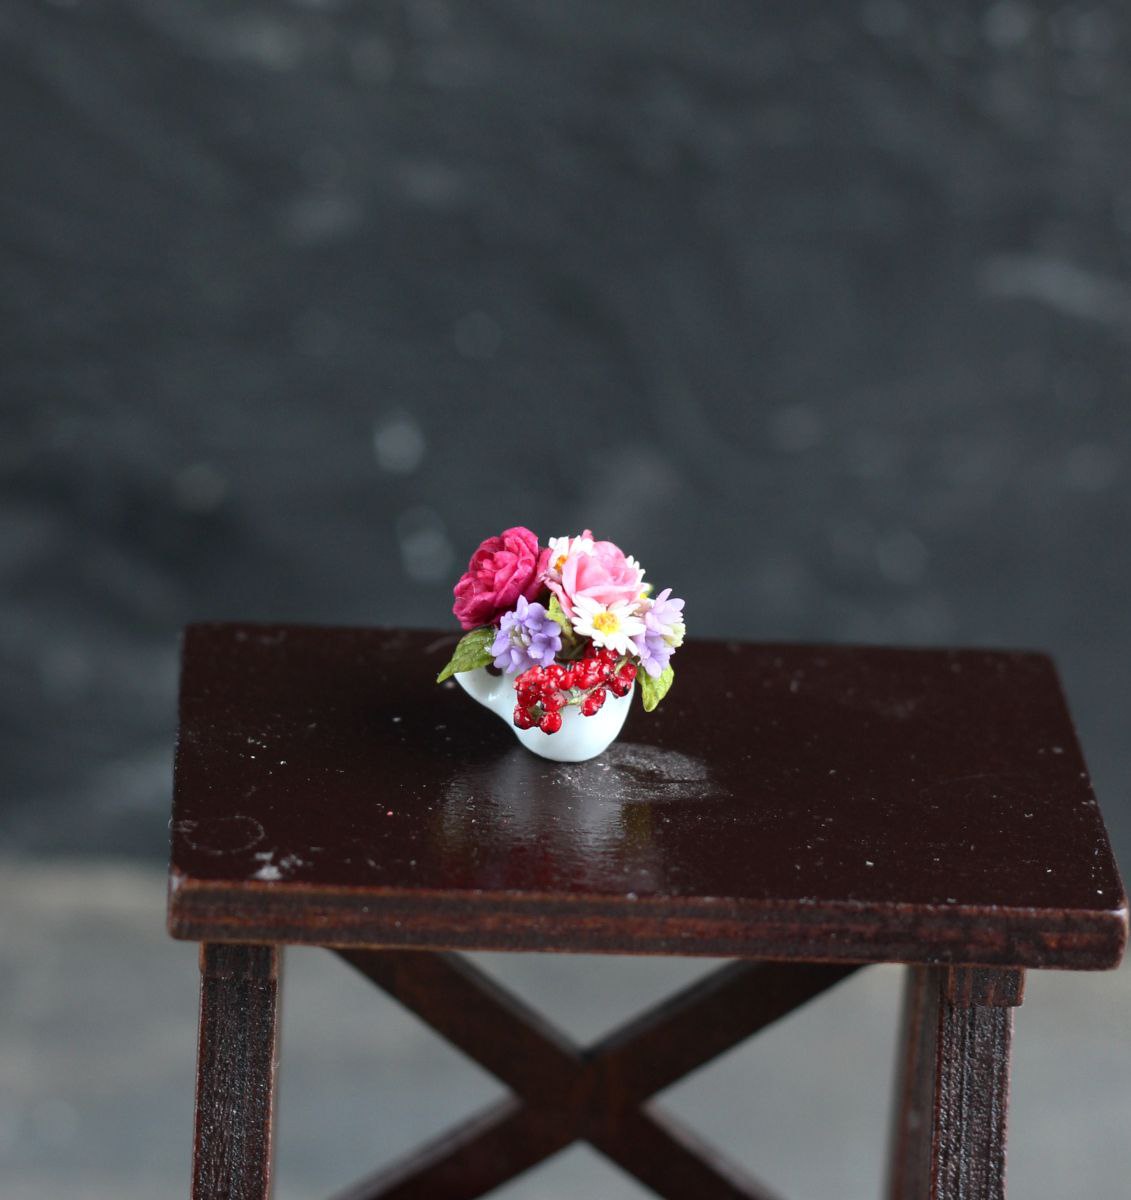 Cup with flowers in a gift box.